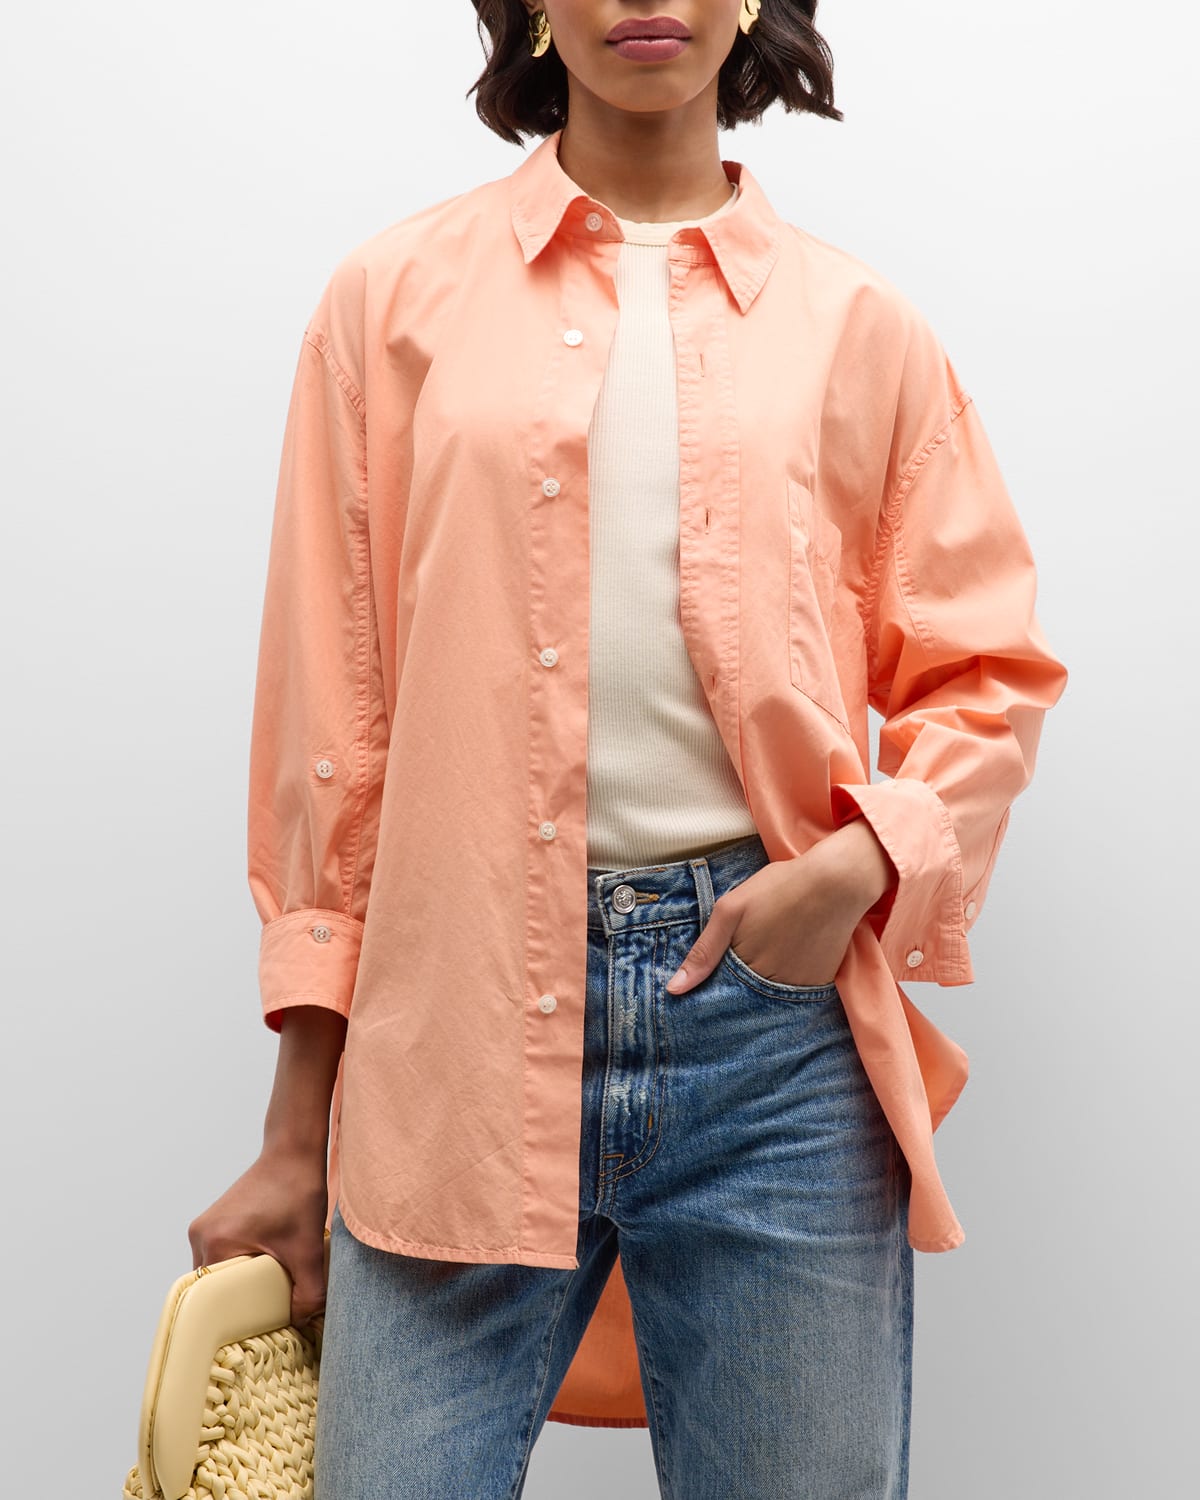 CITIZENS OF HUMANITY KAYLA HIGH-LOW BUTTON-FRONT SHIRT